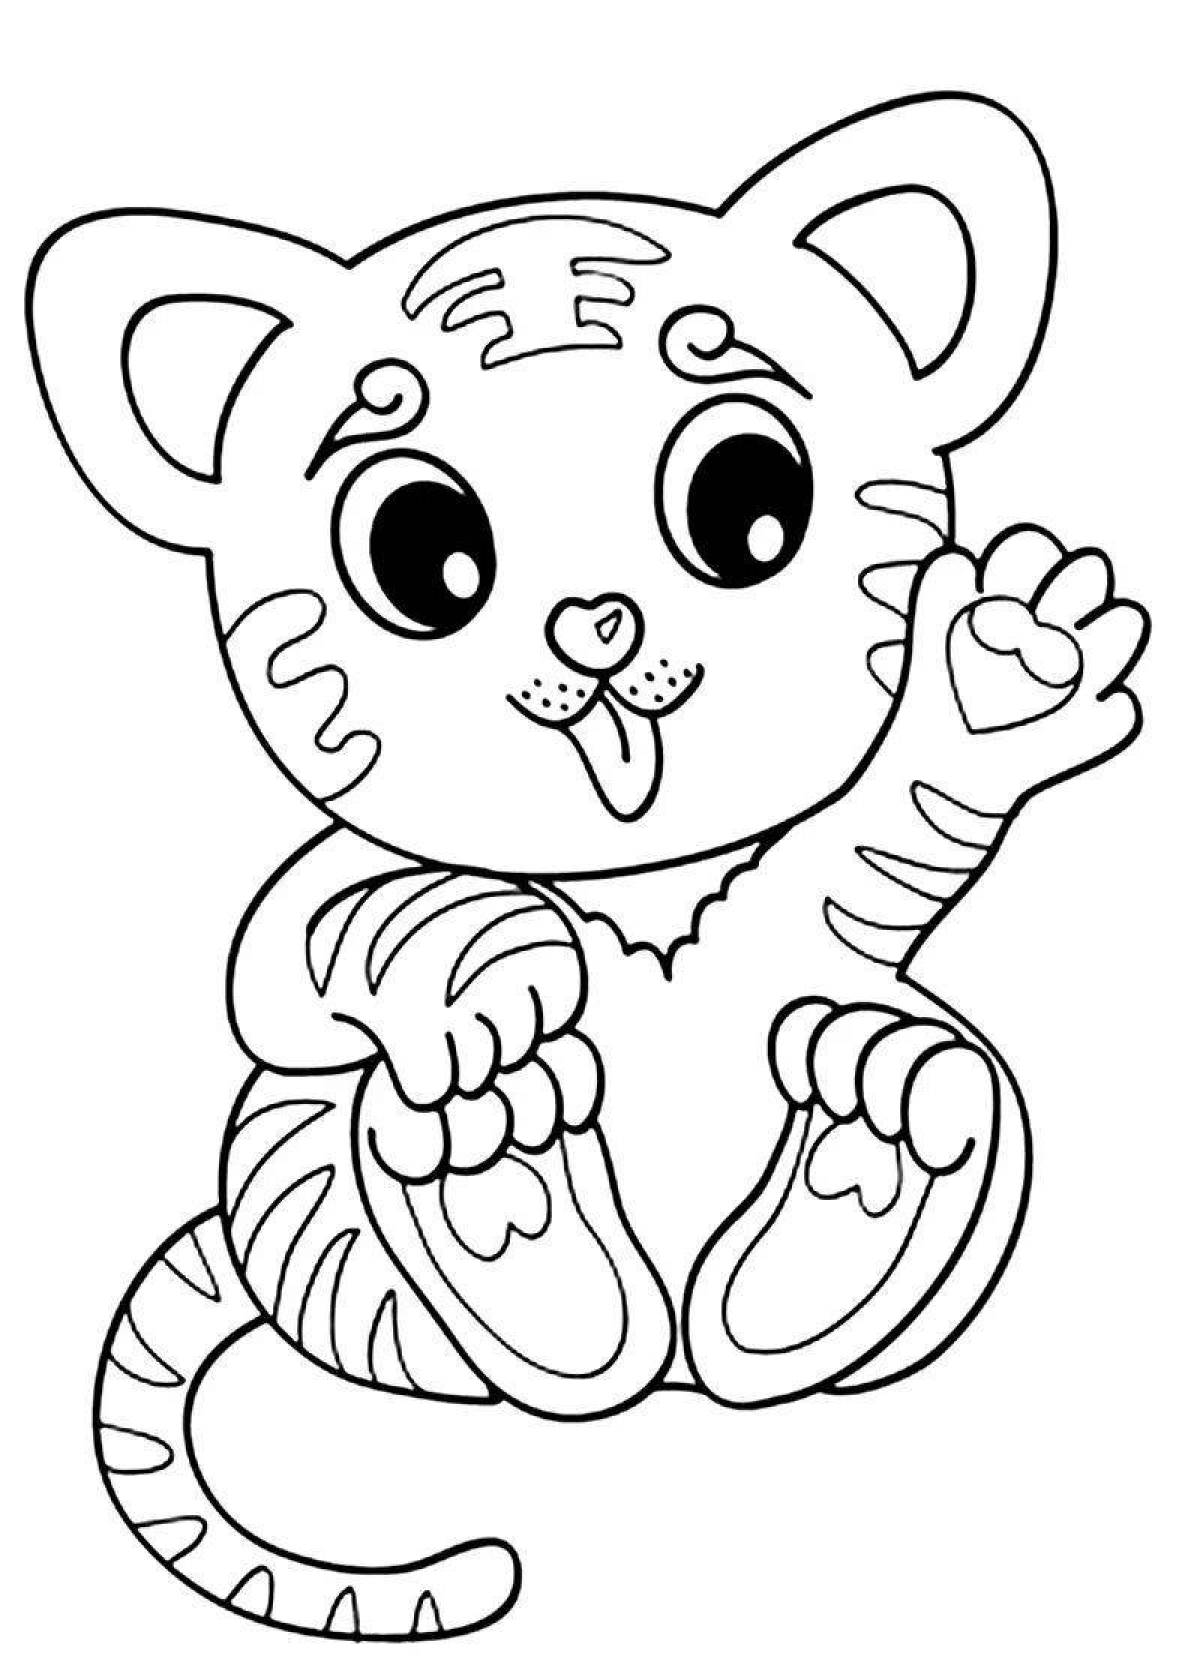 Chubby little animal coloring pages